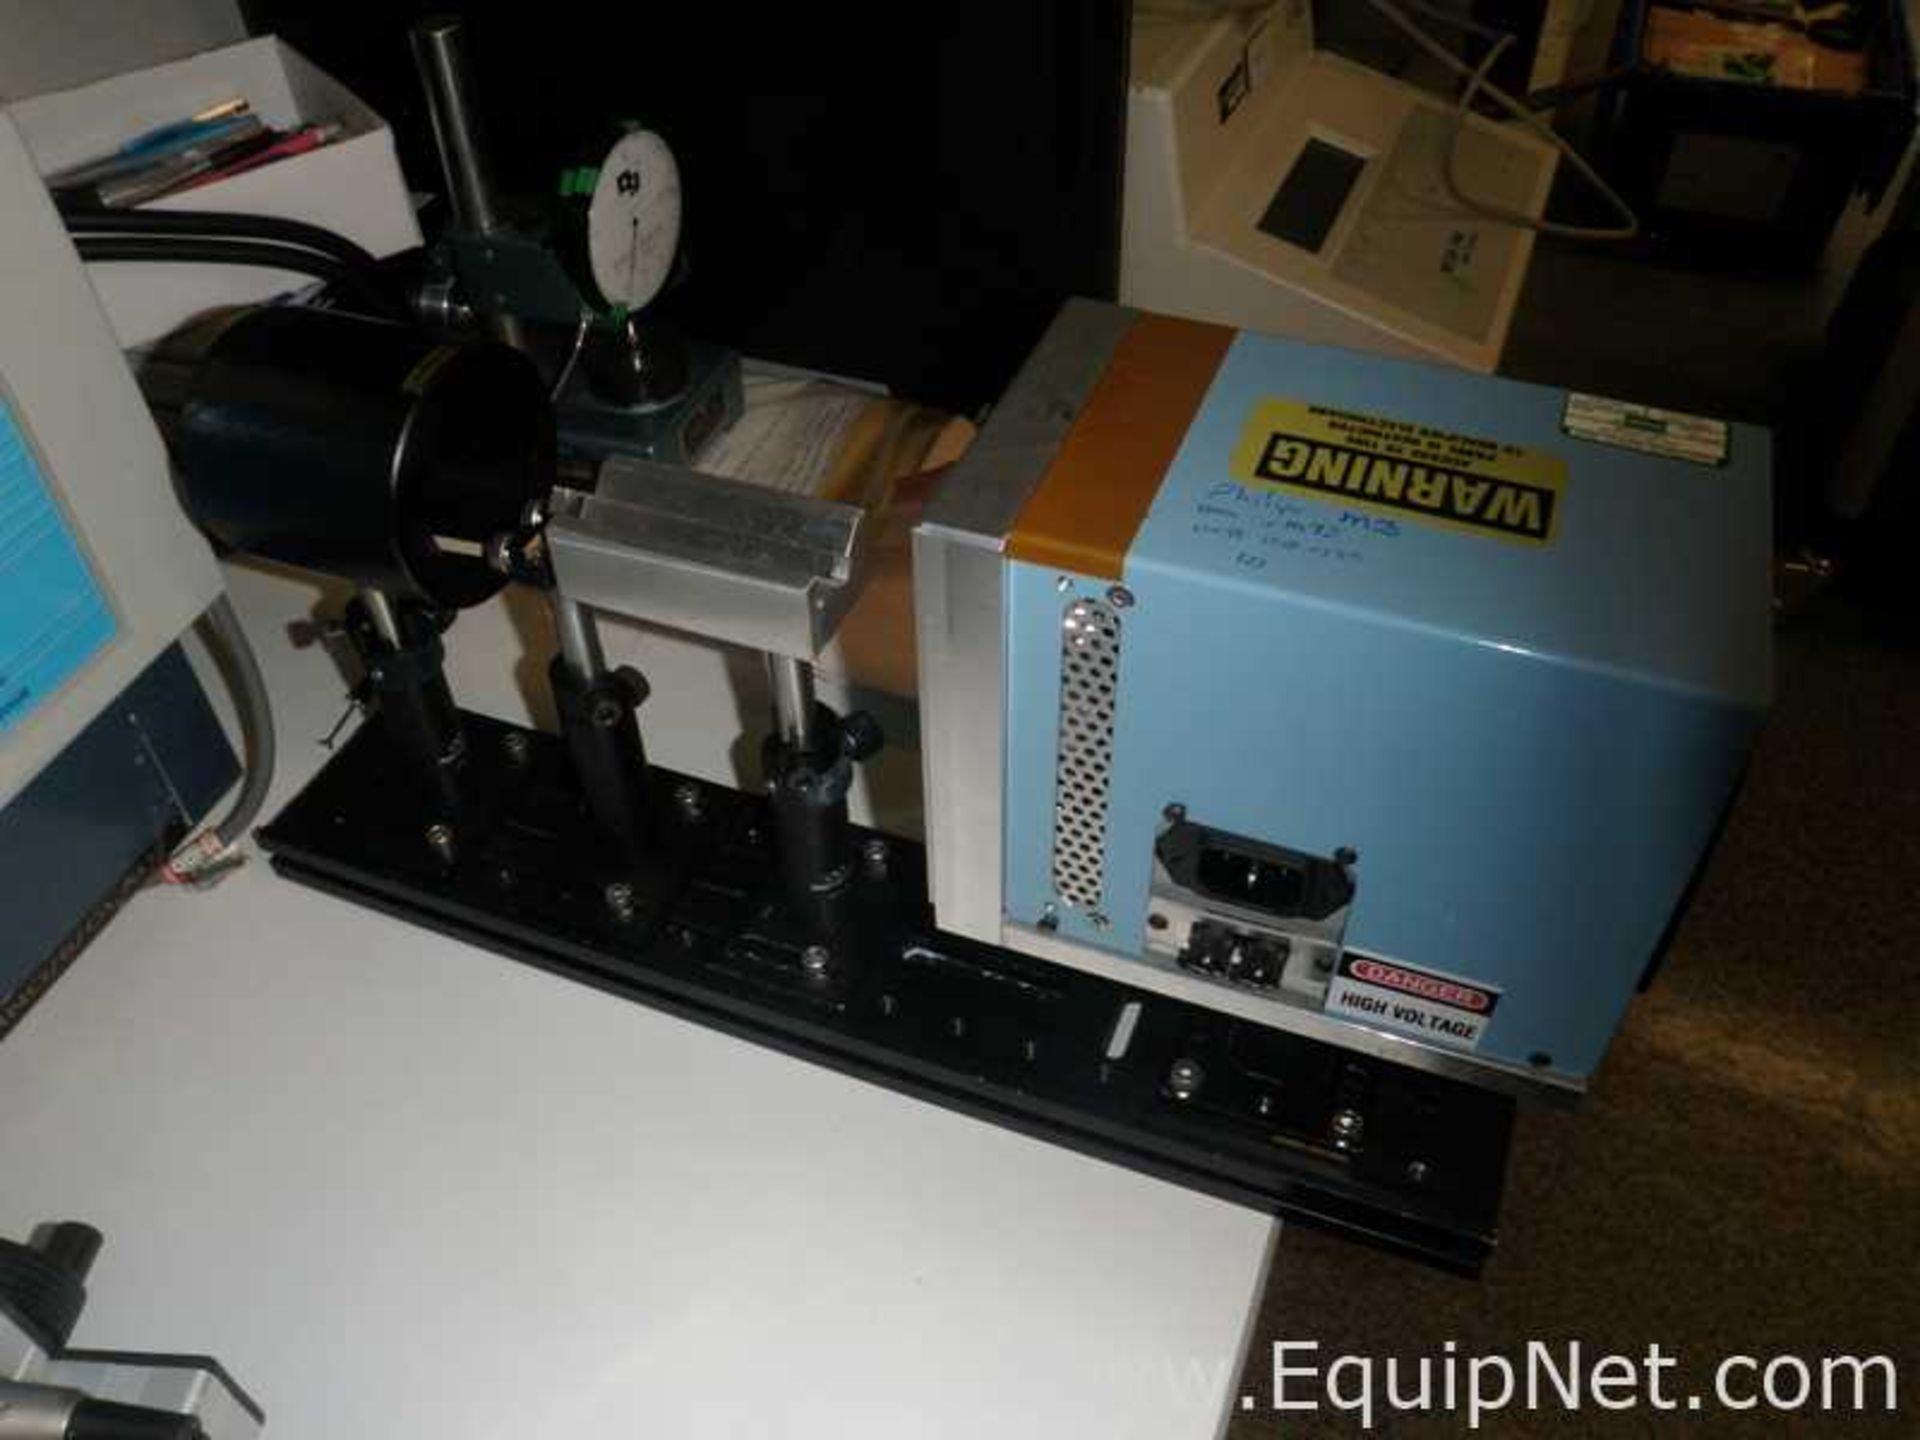 OptioSigma Hi Light Flux Tester Bench Top Lab Electronic Testing and Measurement Equipment - Image 2 of 8